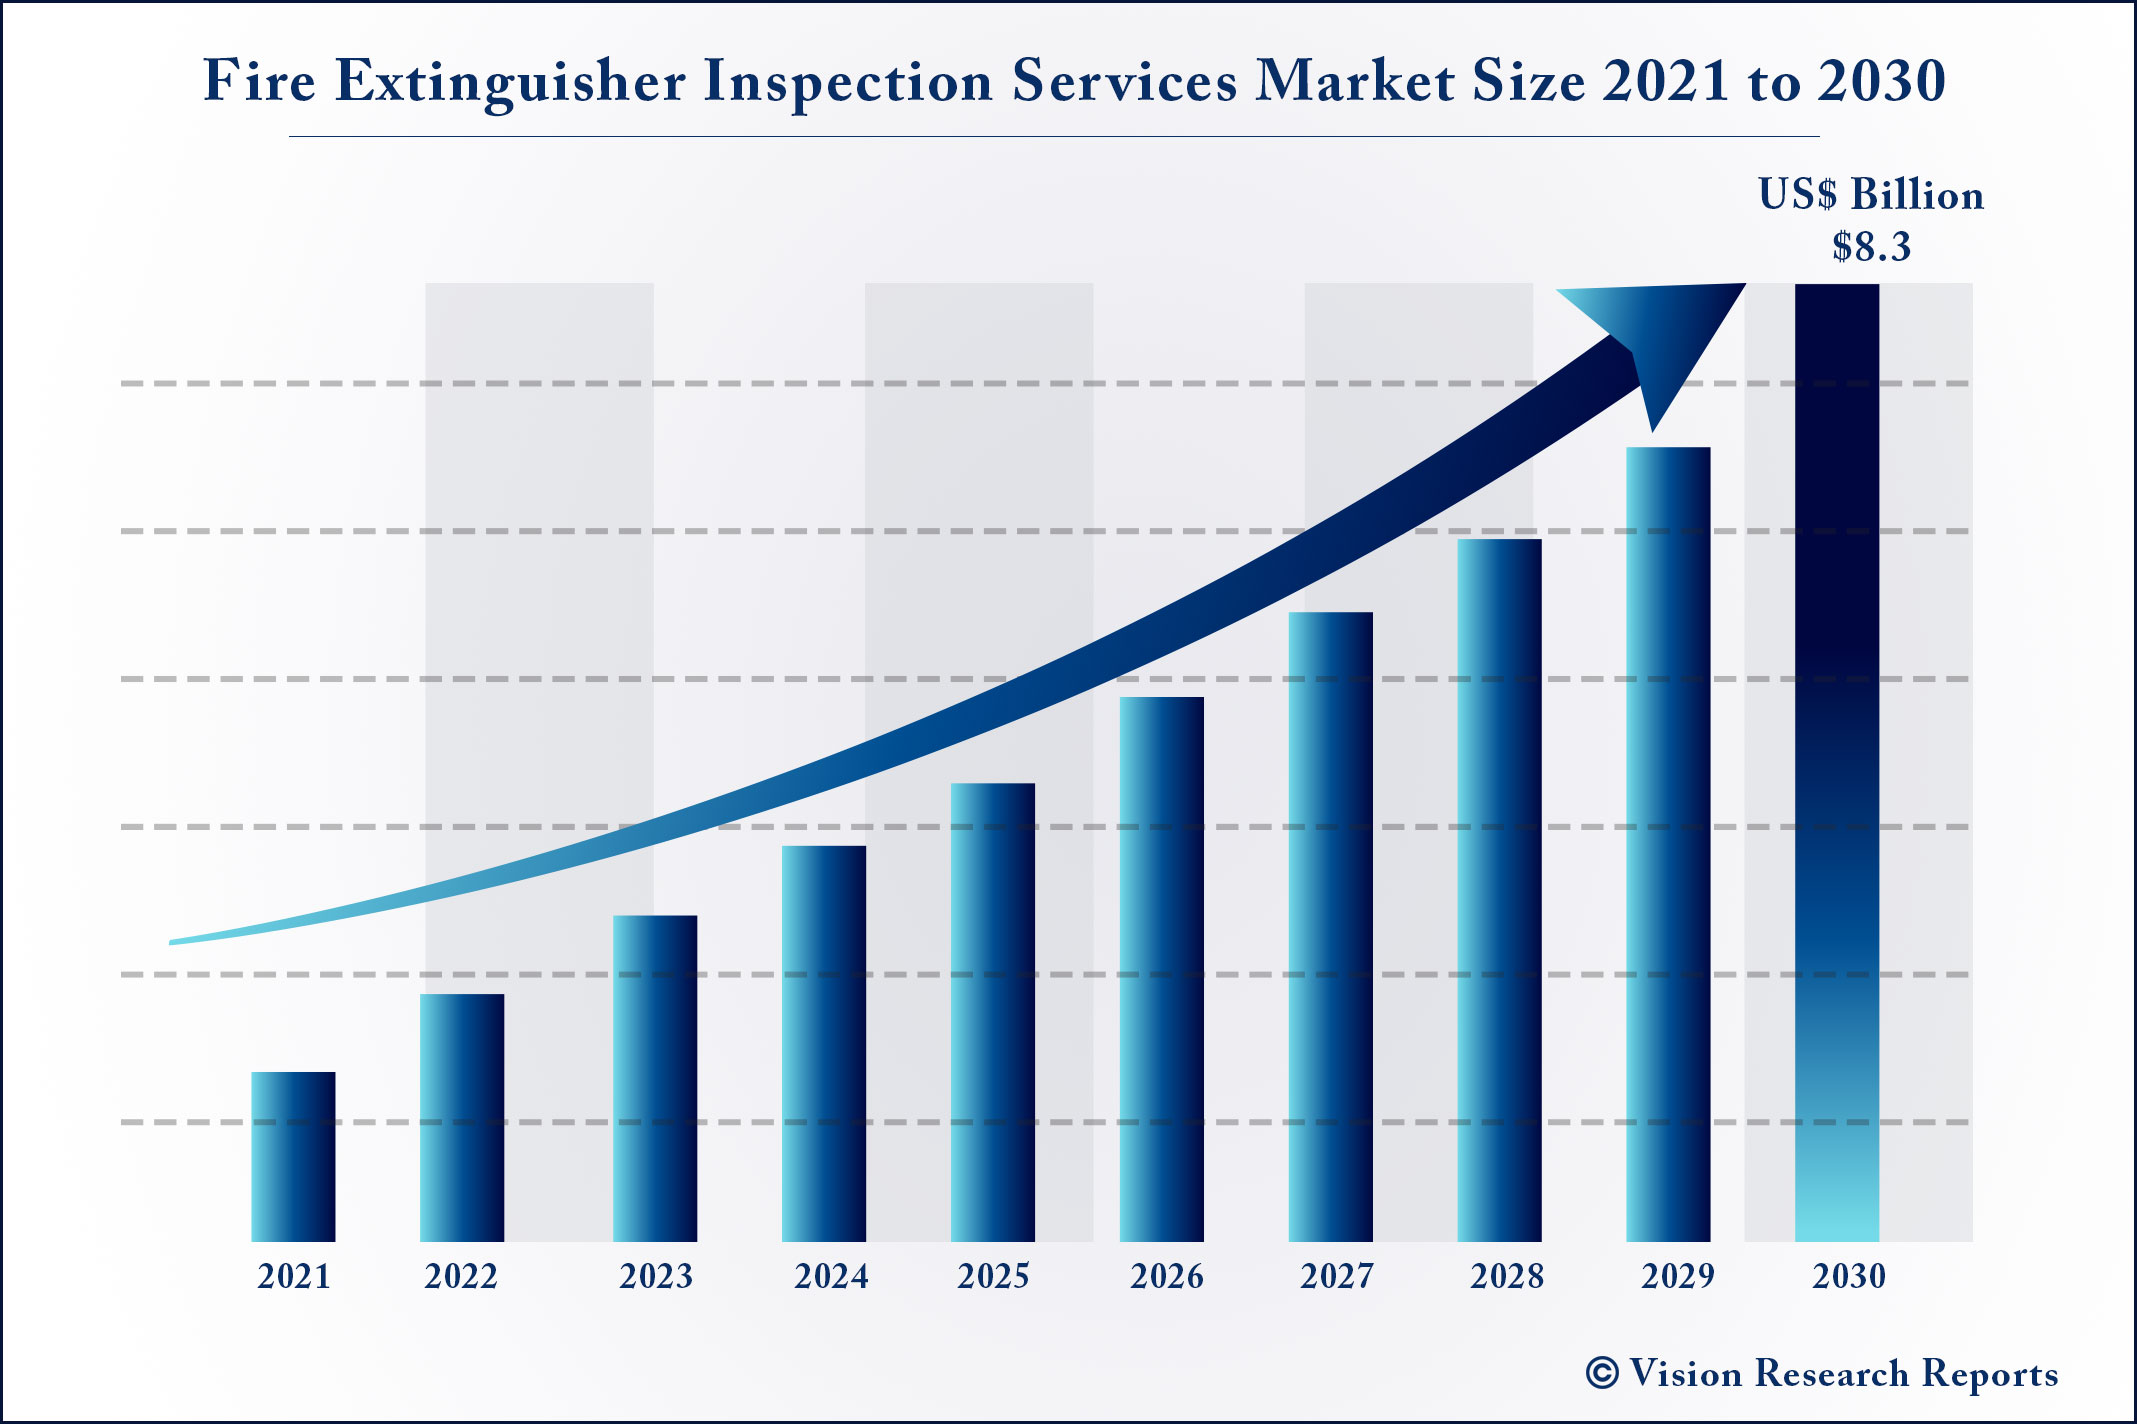 Fire Extinguisher Inspection Services Market Size 2021 to 2030